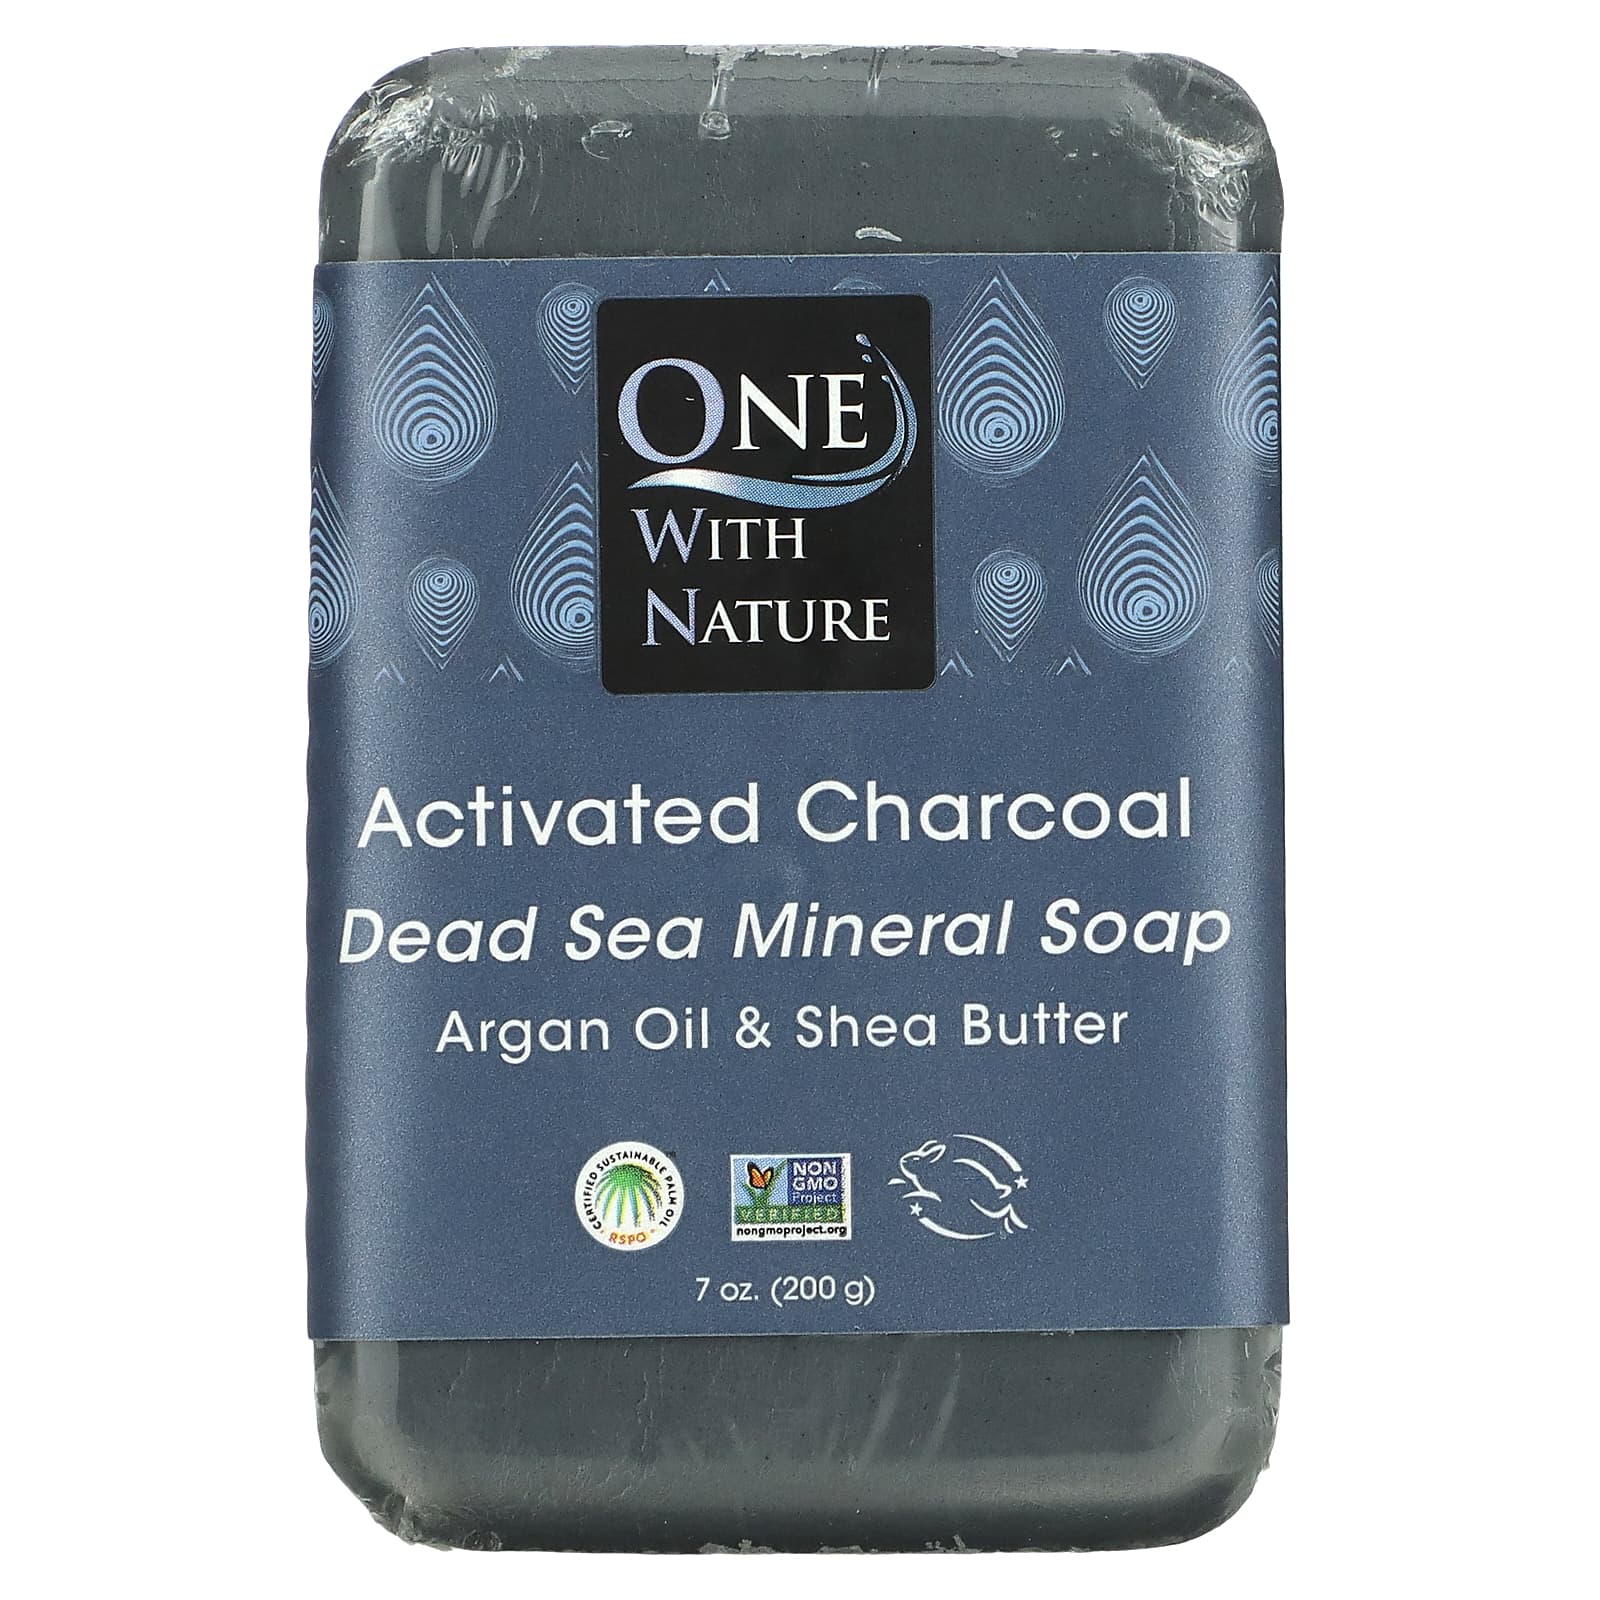 One with Nature Triple Milled Mineral Soap Bar Activated Charcoal 7 oz (200 g)